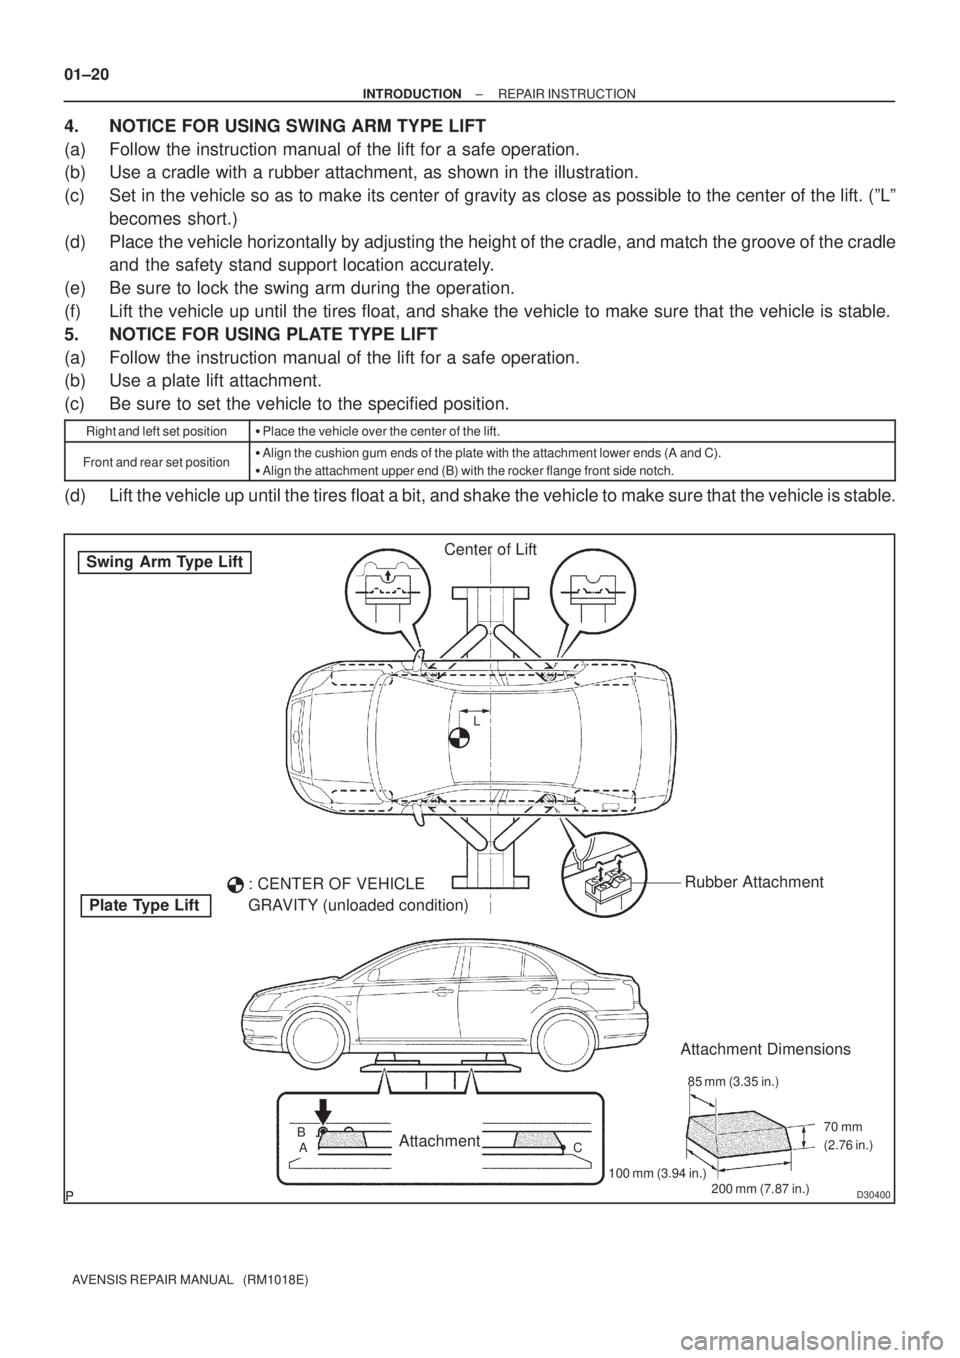 TOYOTA AVENSIS 2005  Service Repair Manual D30400
Swing  Arm Type Lift
Plate Type LiftCenter of Lift
: CENTER OF VEHICLE 
GRAVITY (unloaded condition)Rubber Attachment
AttachmentBAL
Attachment Dimensions
85 mm (3.35 in.)
200 mm (7.87 in.) 100 